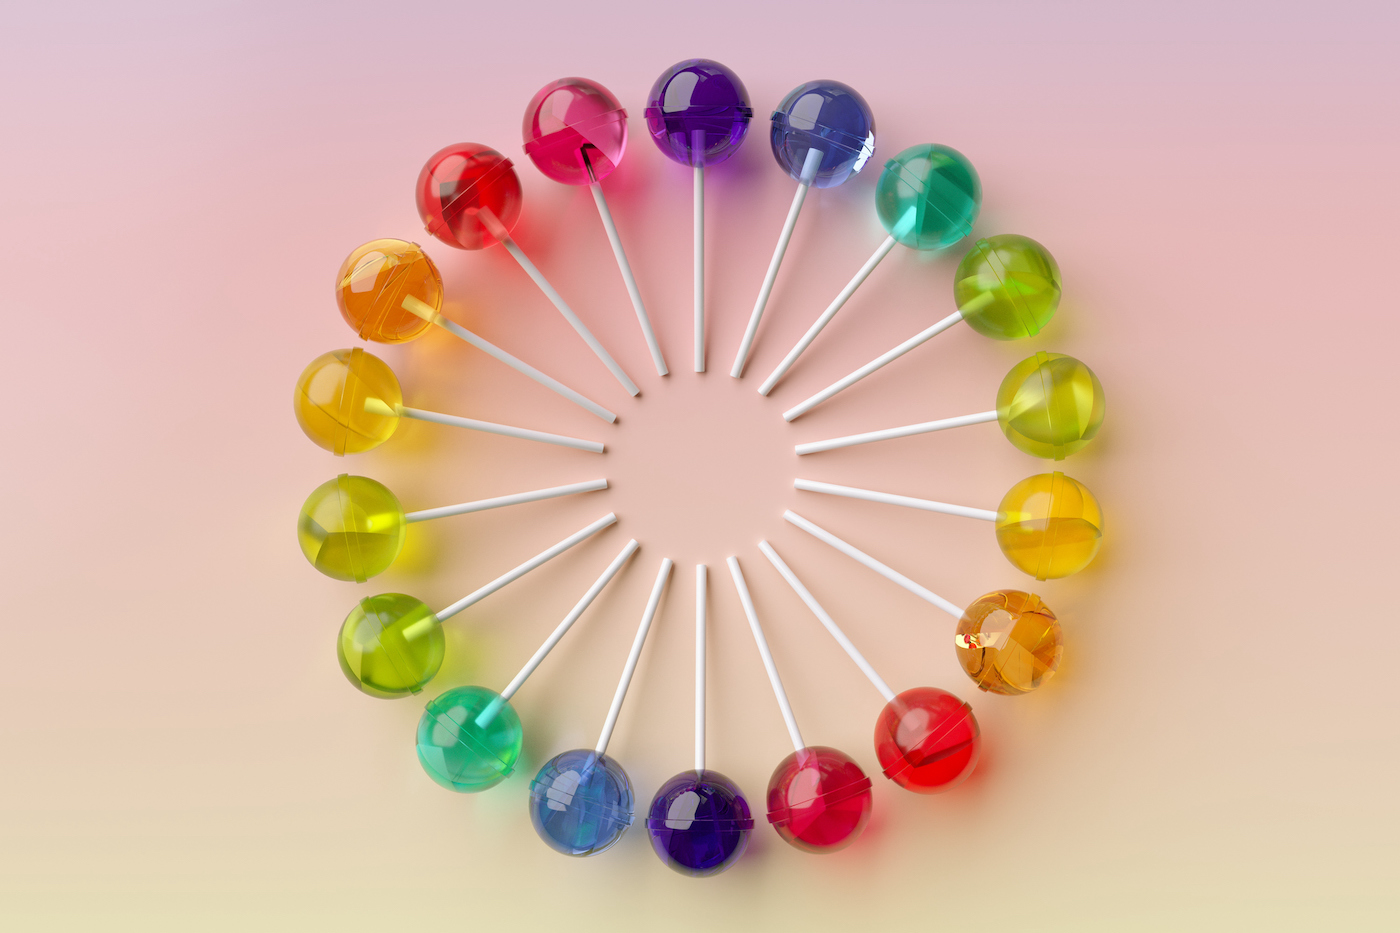 Digitally generated image of many lollipop organized into a circular pattern on a pink surface.